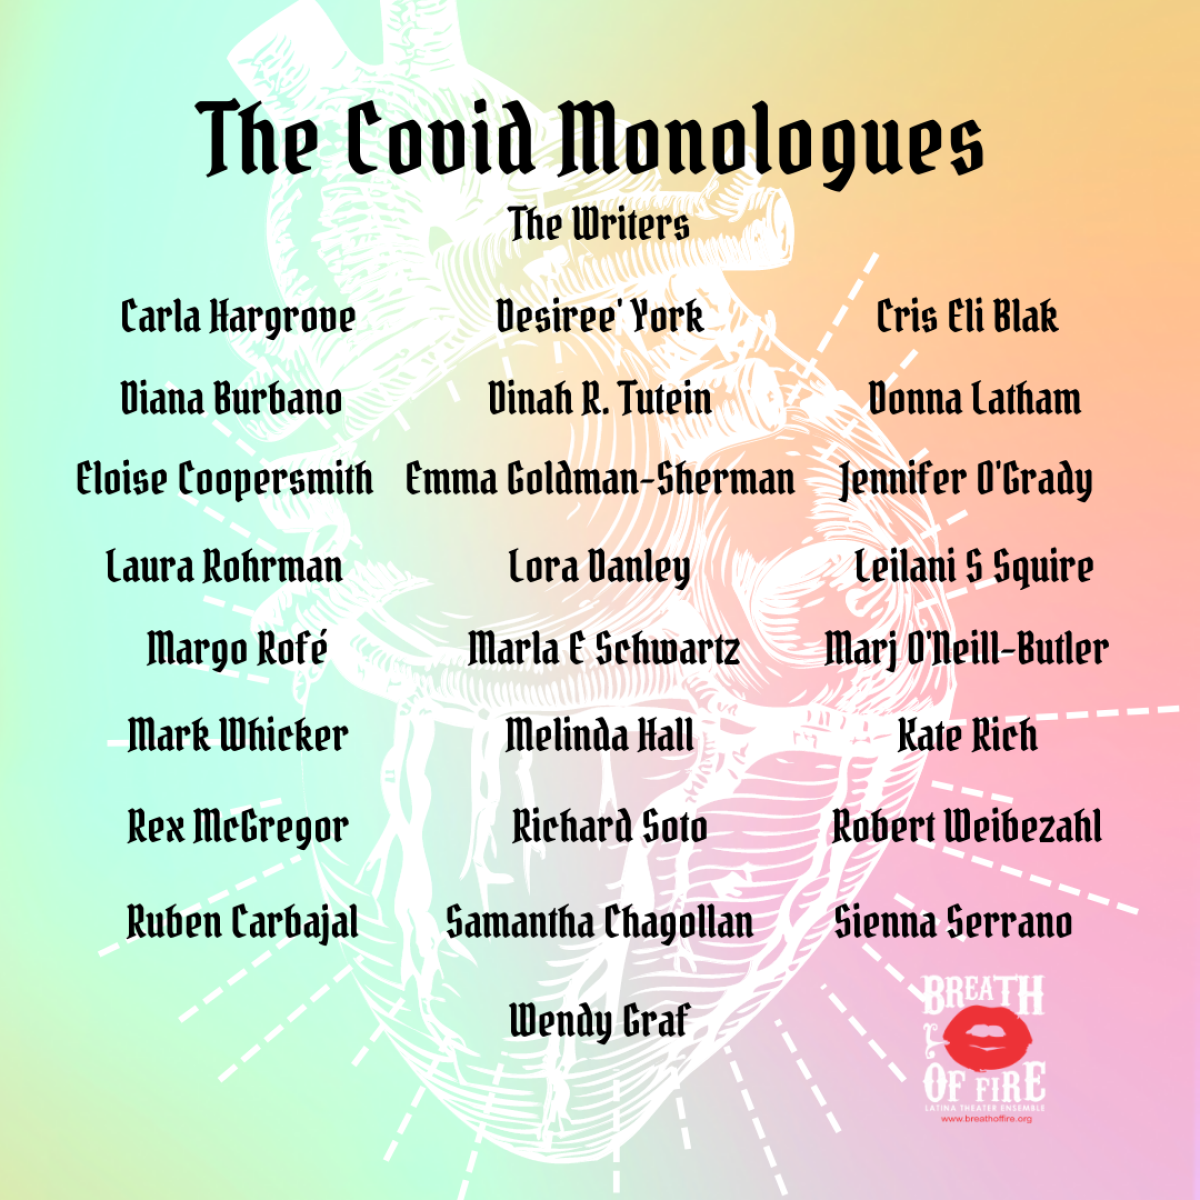 "The COVID Monologues" list of 25 writers